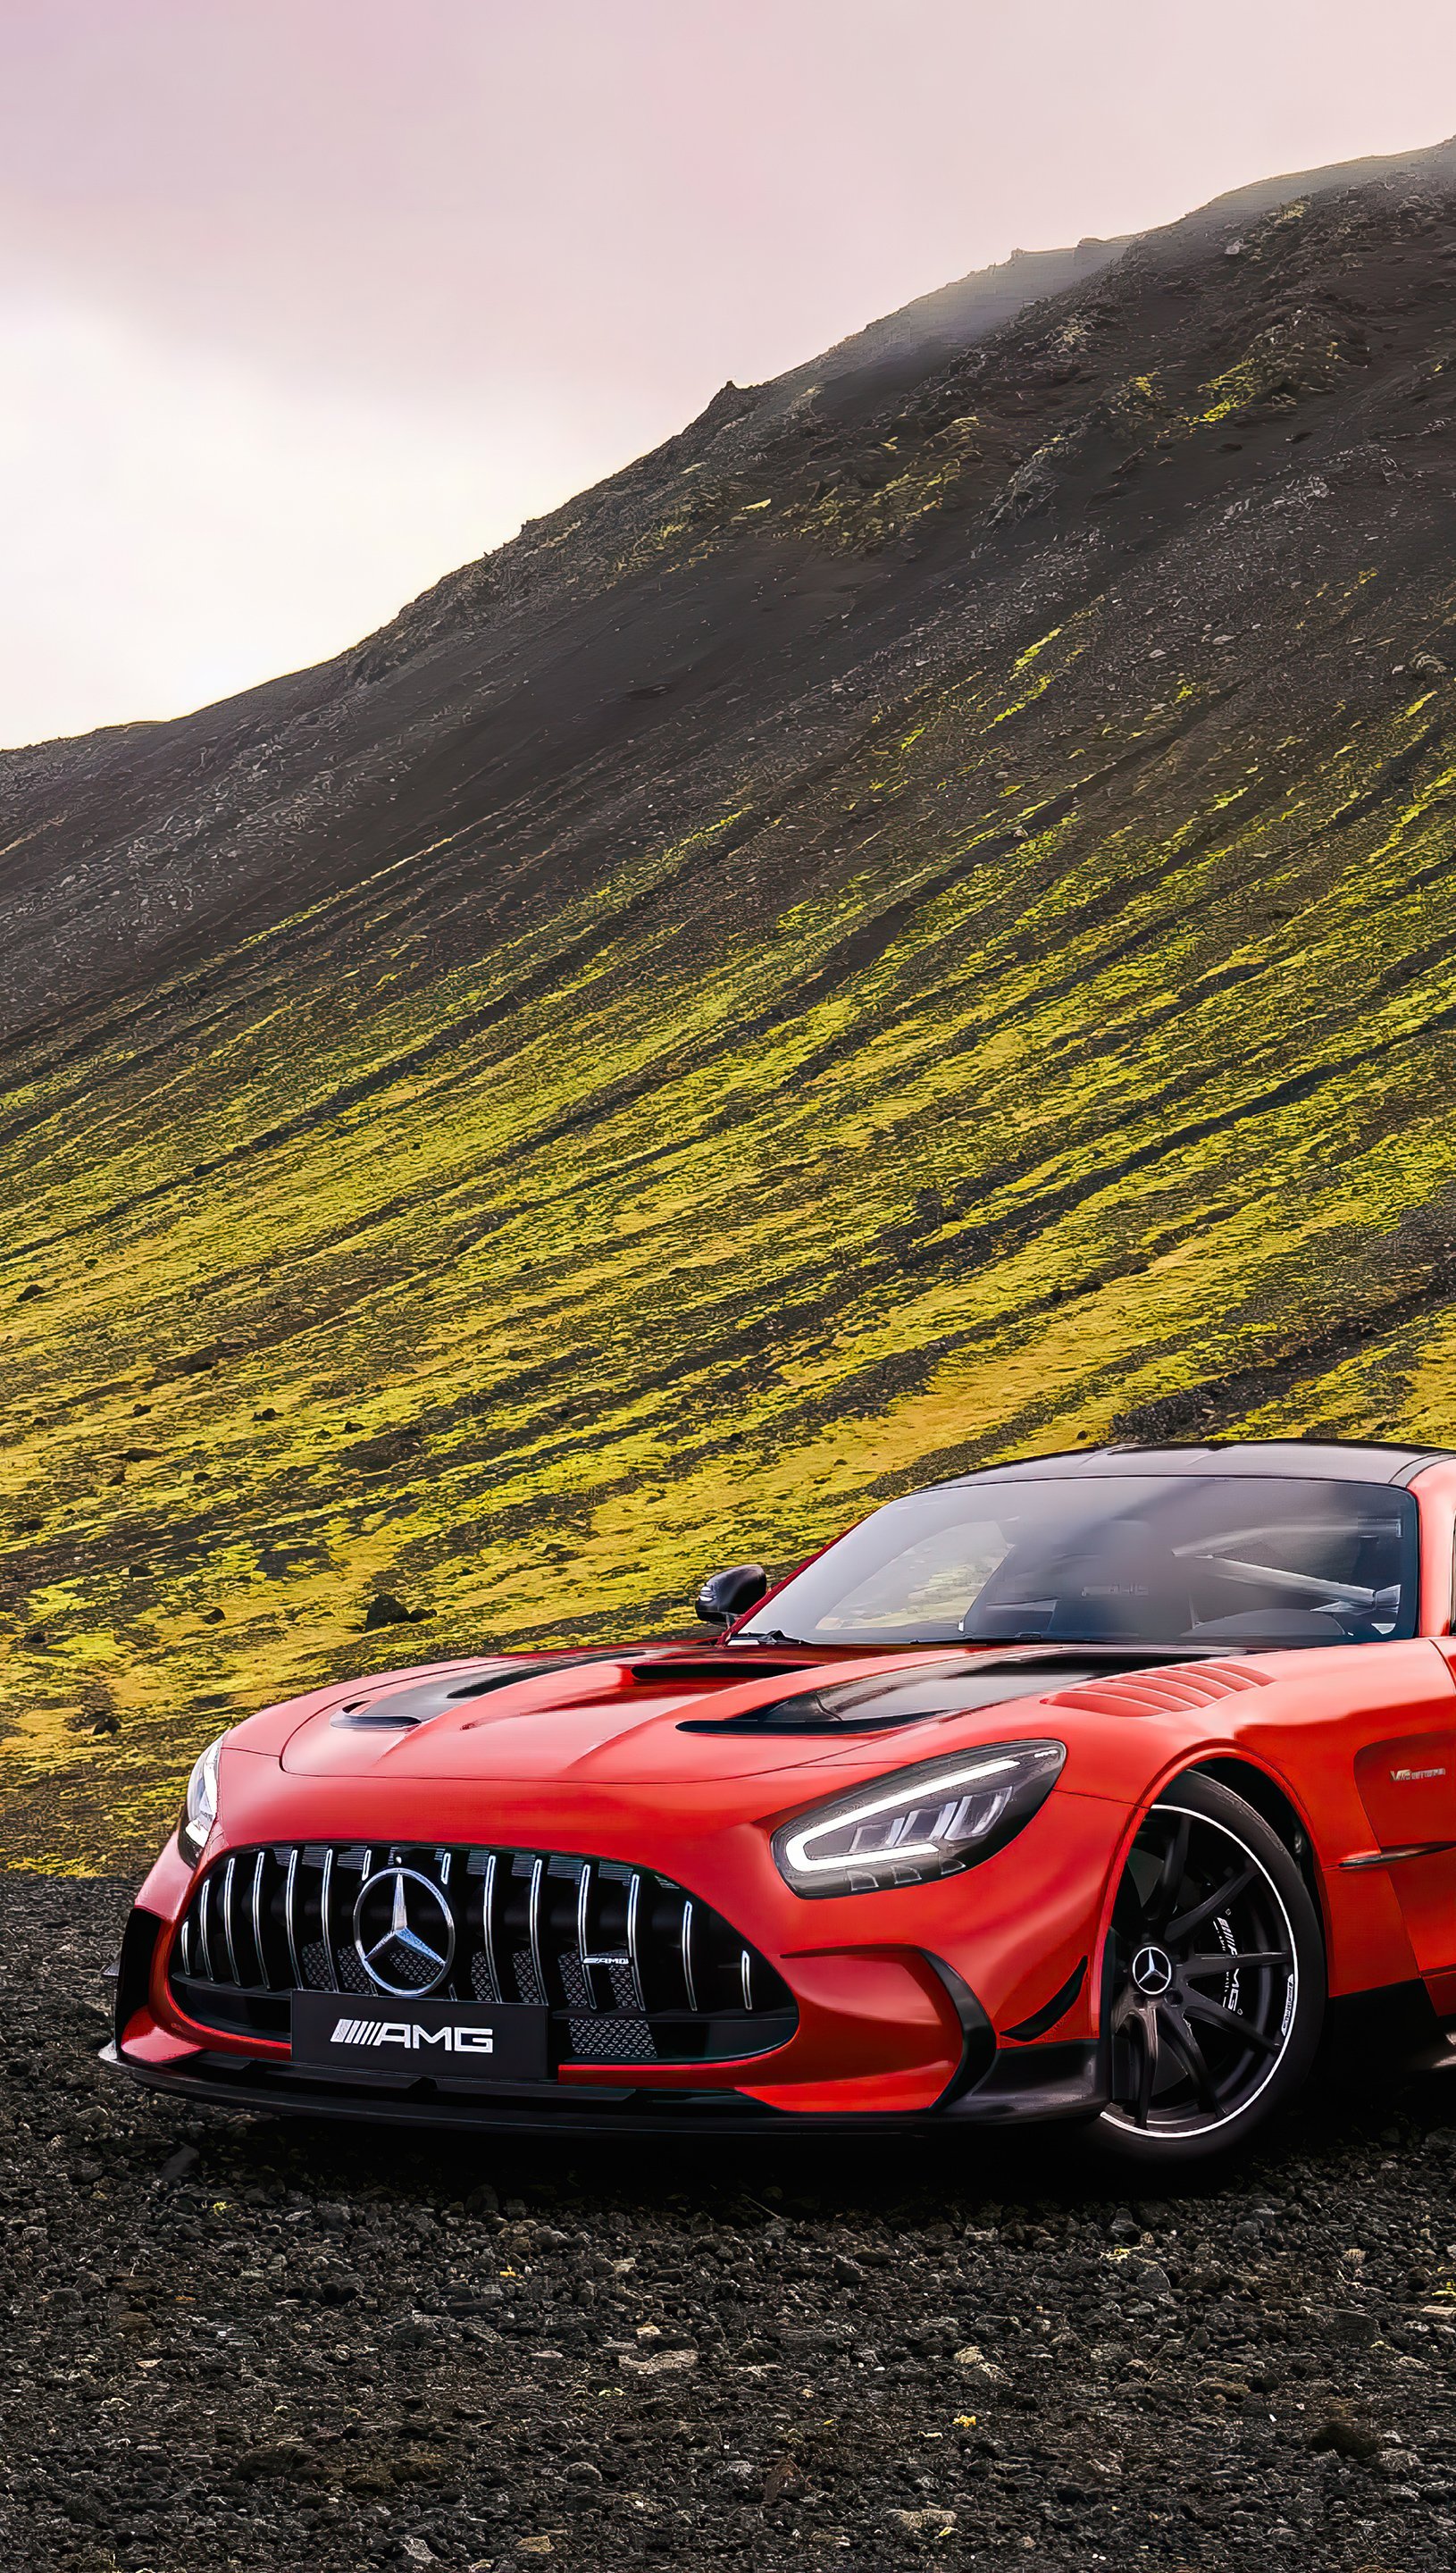 Mercedes-Amg Gt Wallpapers